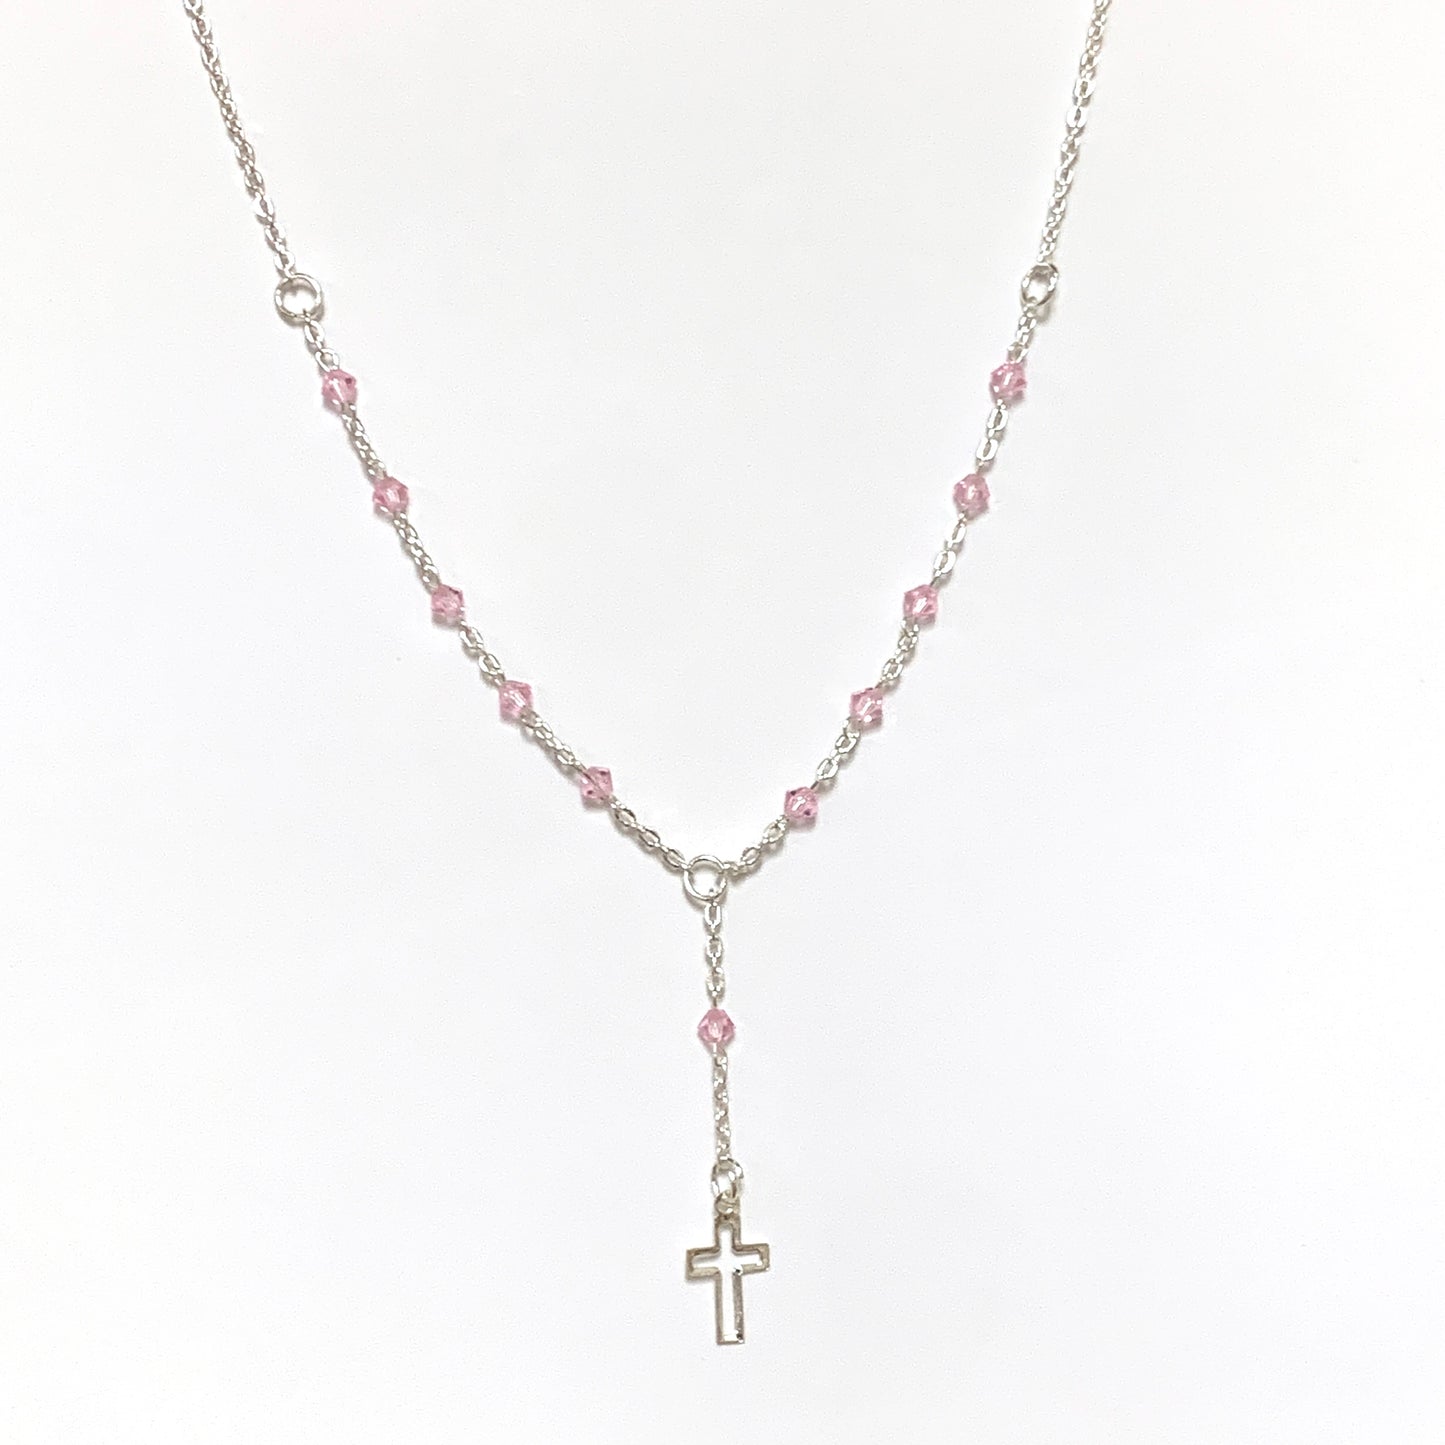 Silver and Crystal Decade Rosary Necklace of Assorted Colors